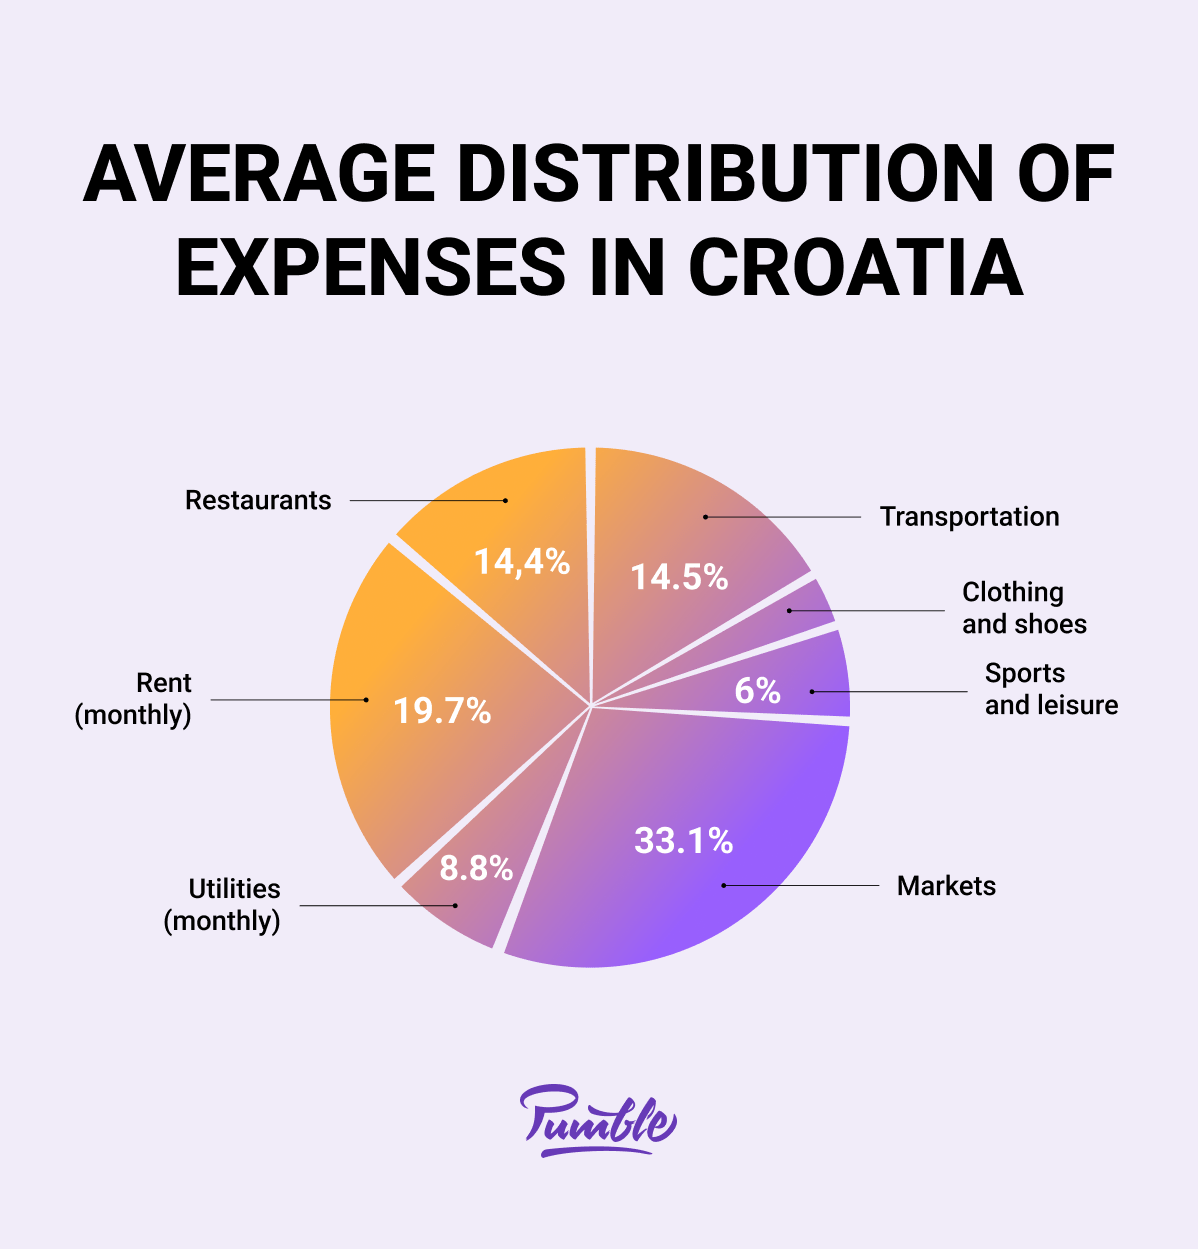 Croatians spend, on average, around 33% of their income on groceries
